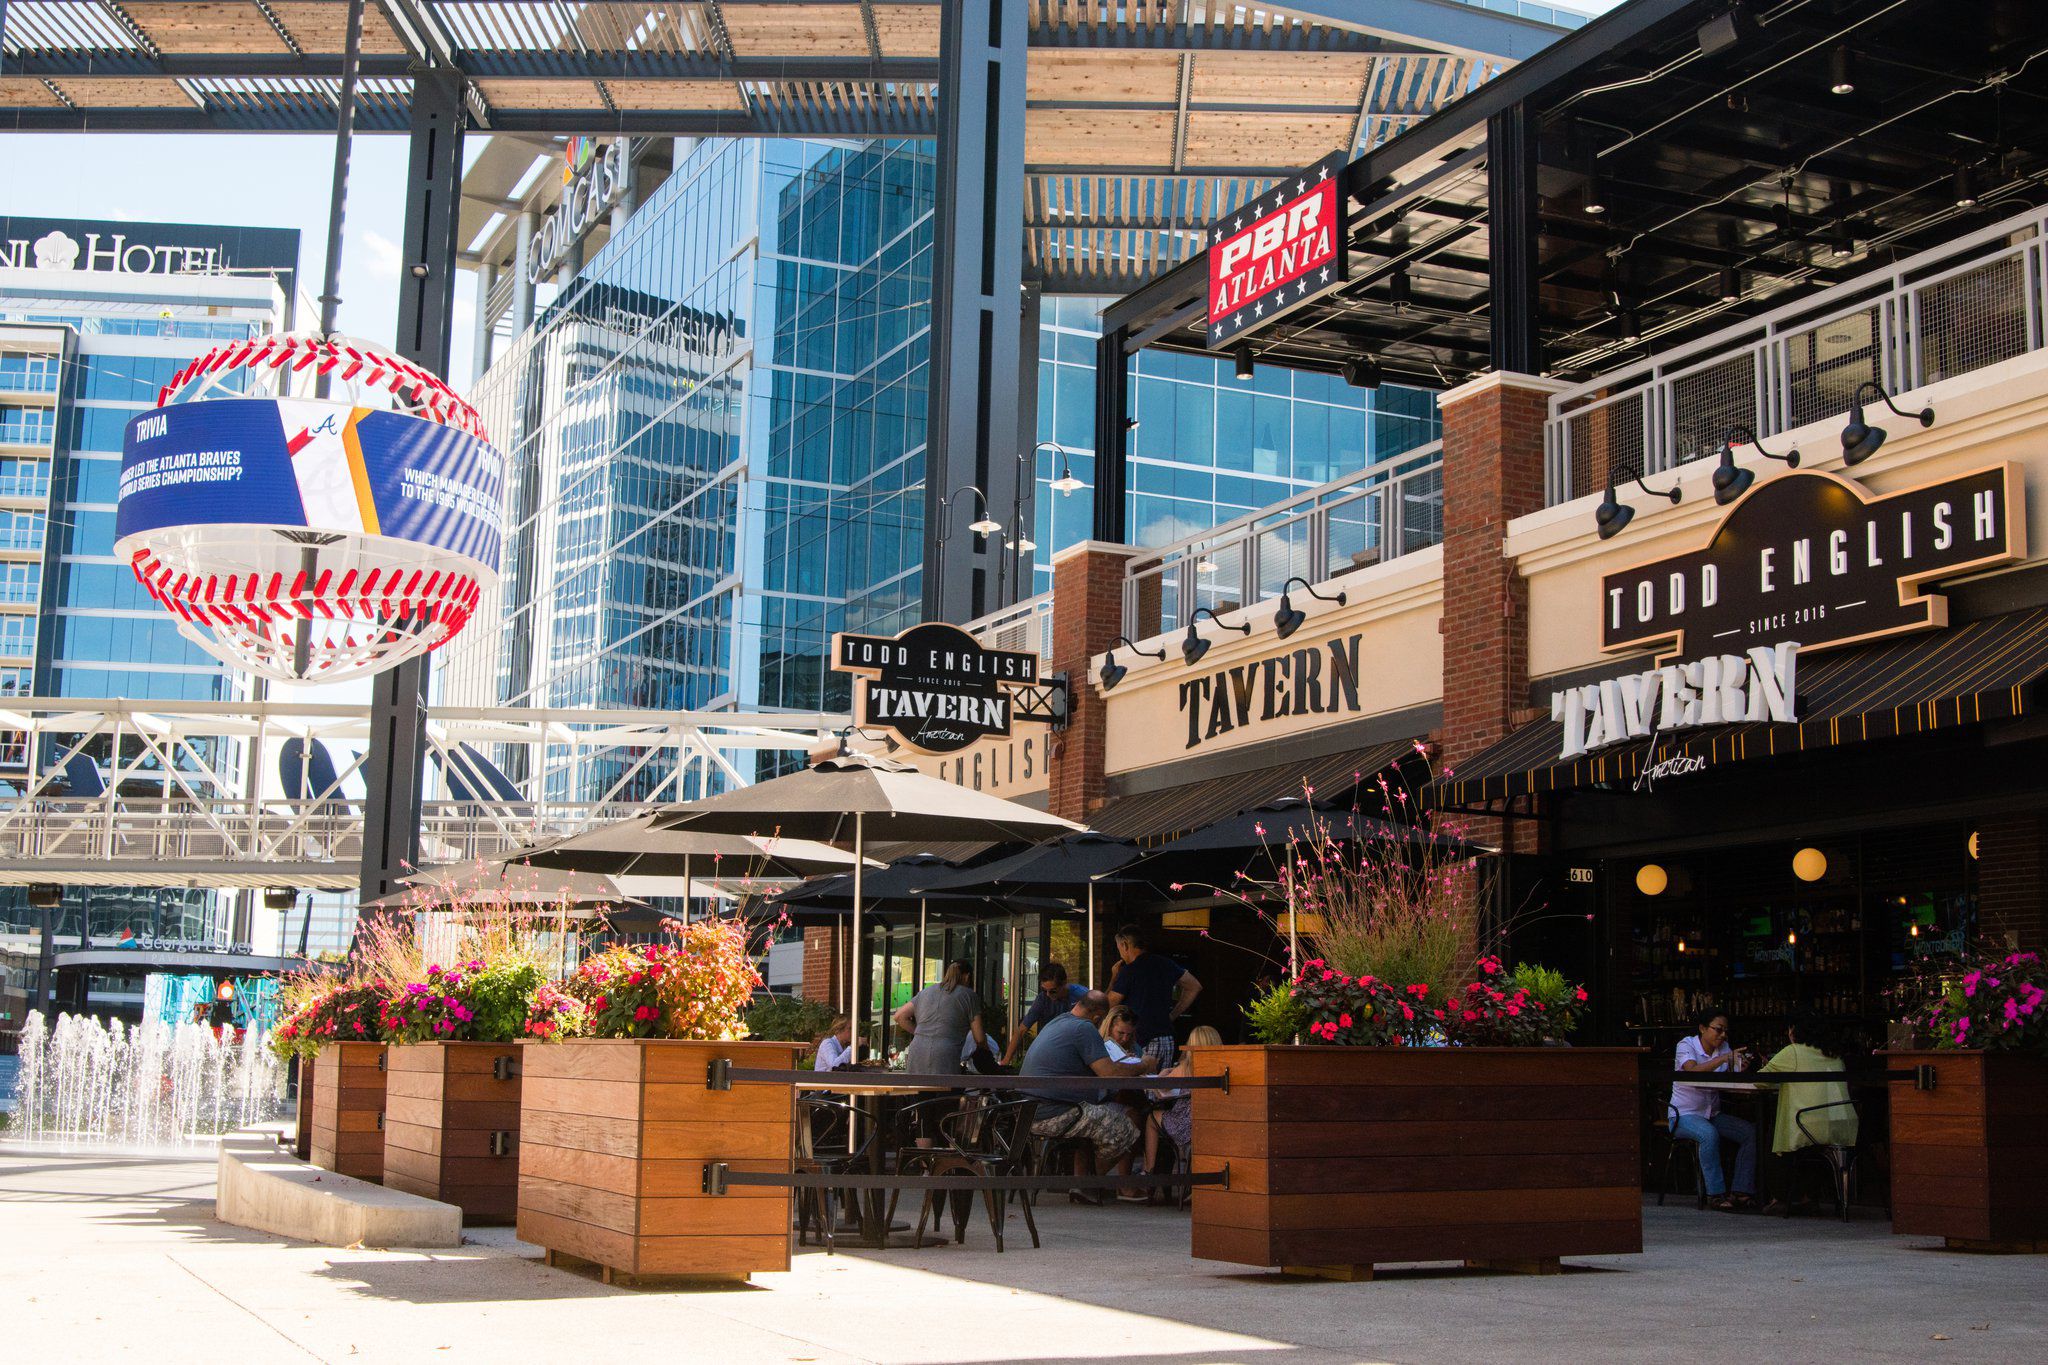 Todd English Tavern Opens Adjacent to the Braves' New Ballpark on